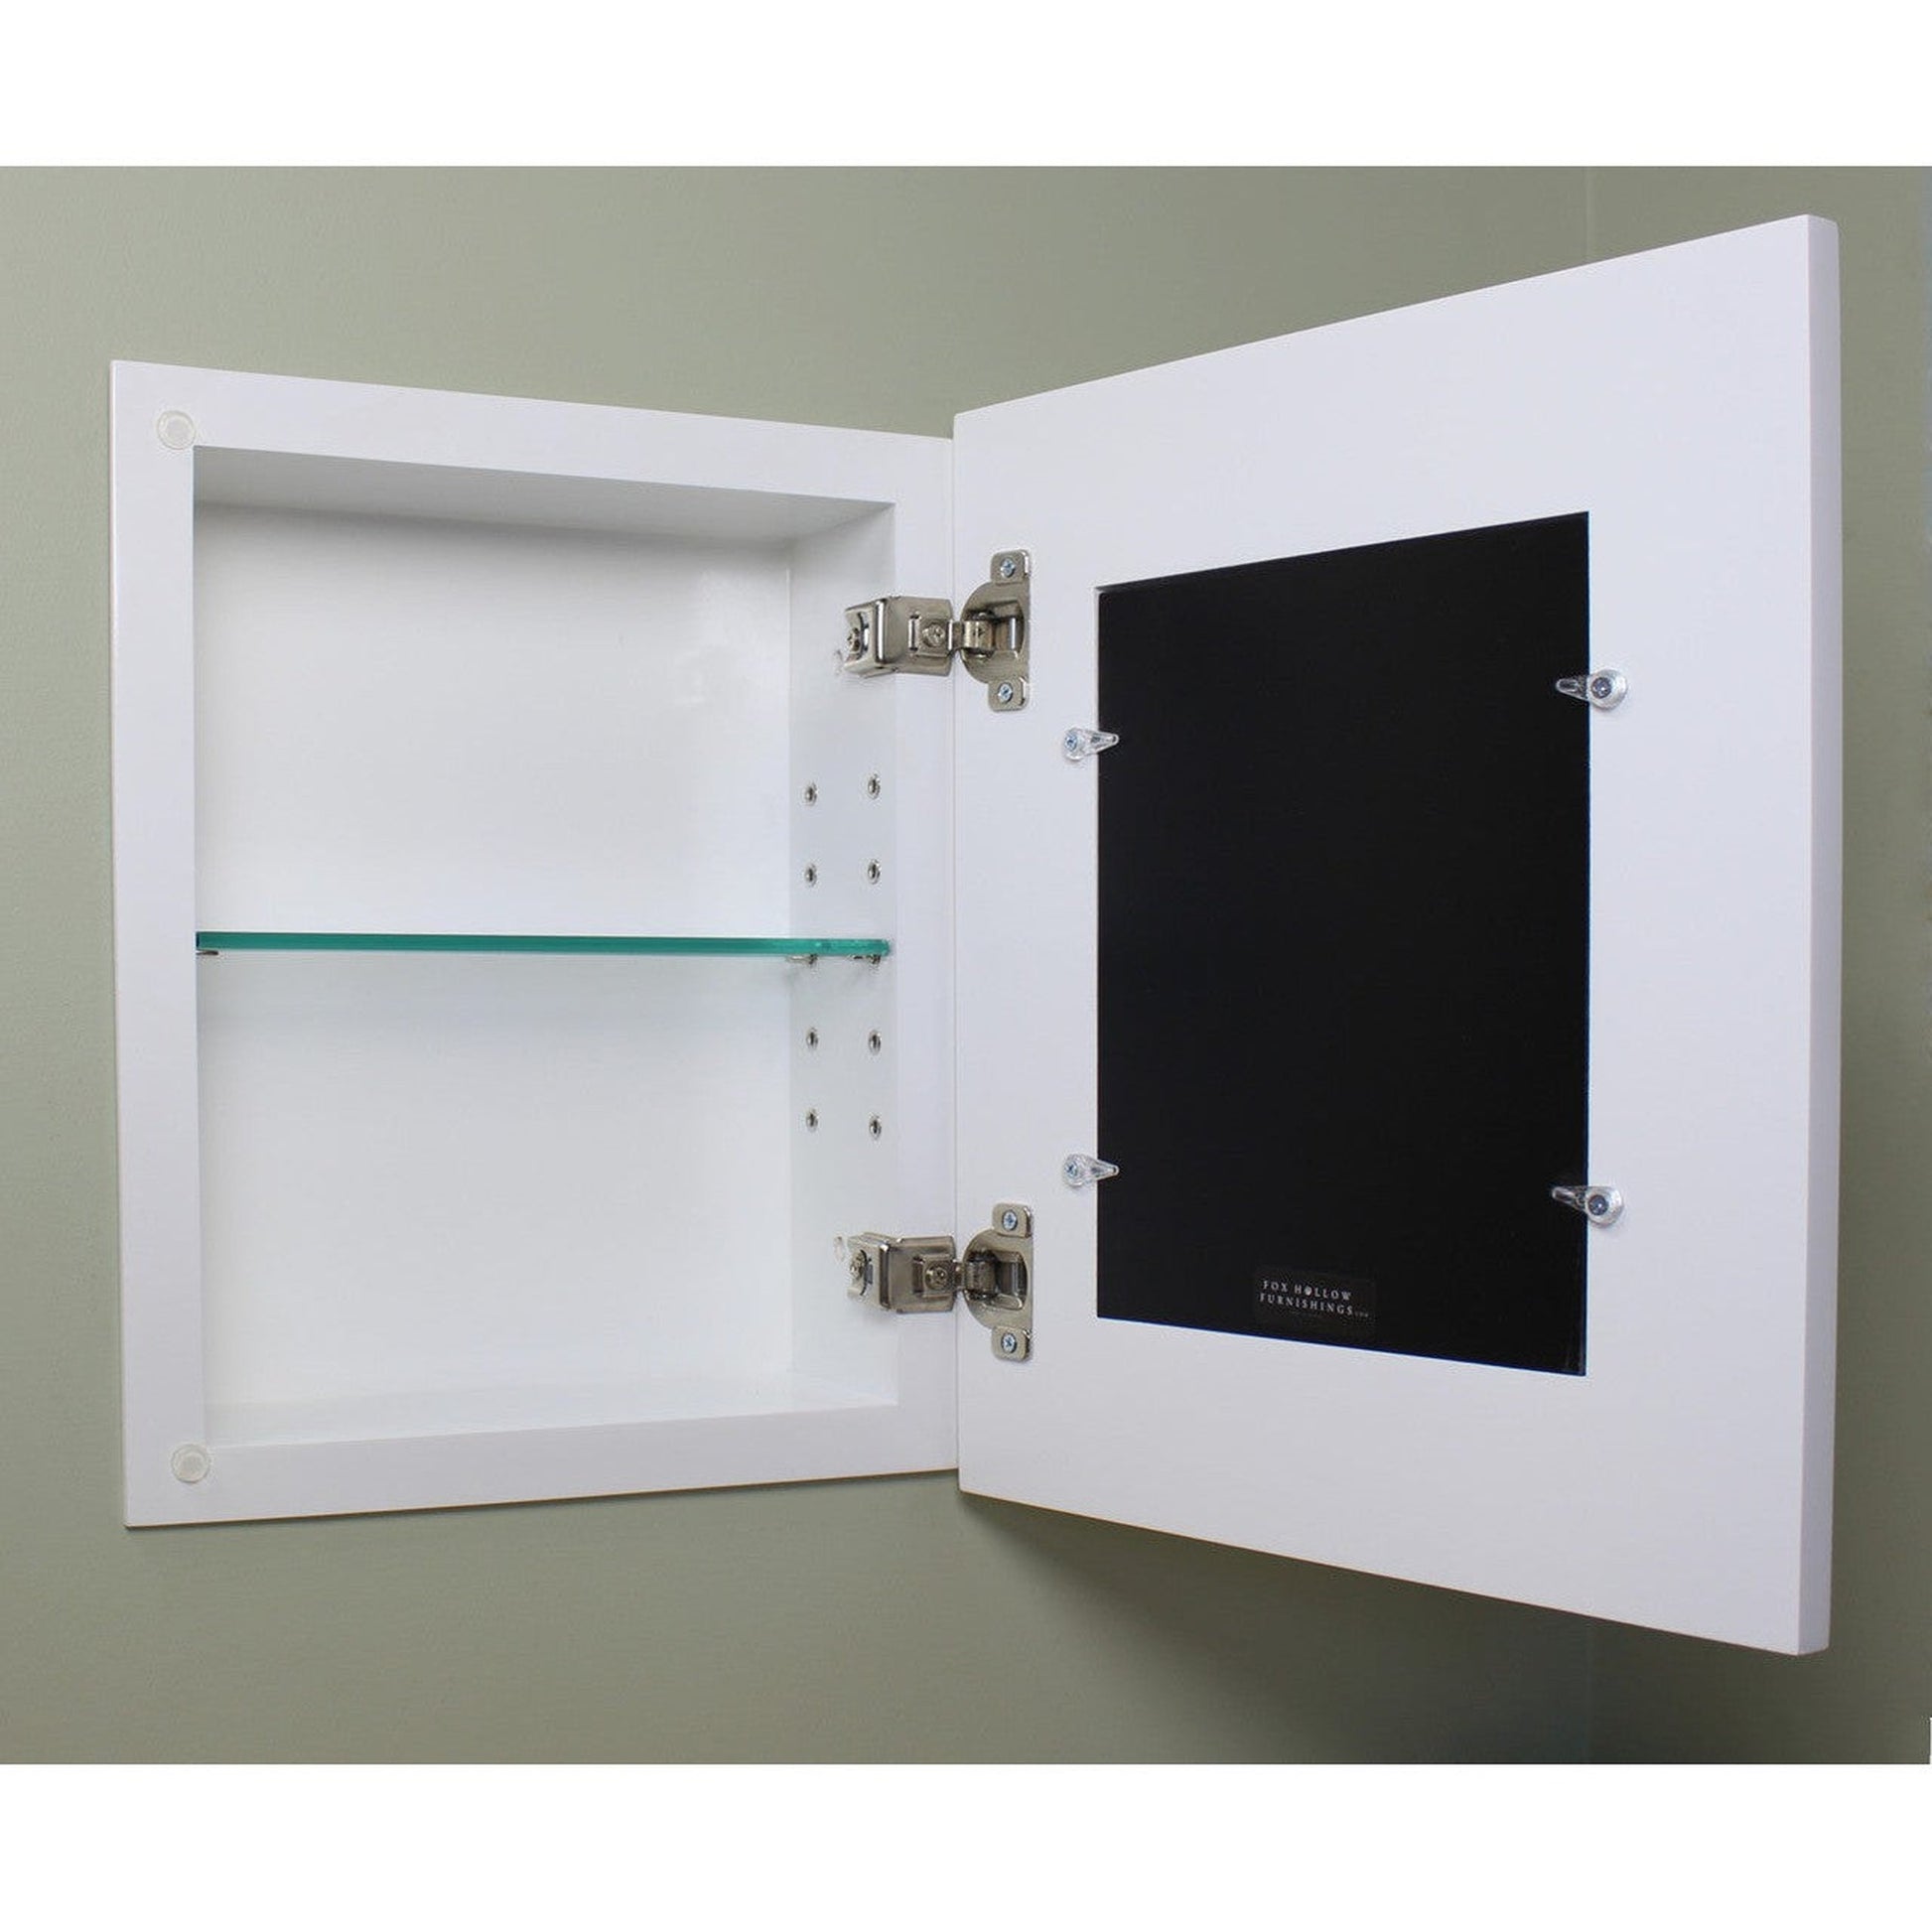 Fox Hollow Furnishings 11" x 14" White Compact Portrait Shaker Special 3" Depth Recessed Picture Frame Medicine Cabinet